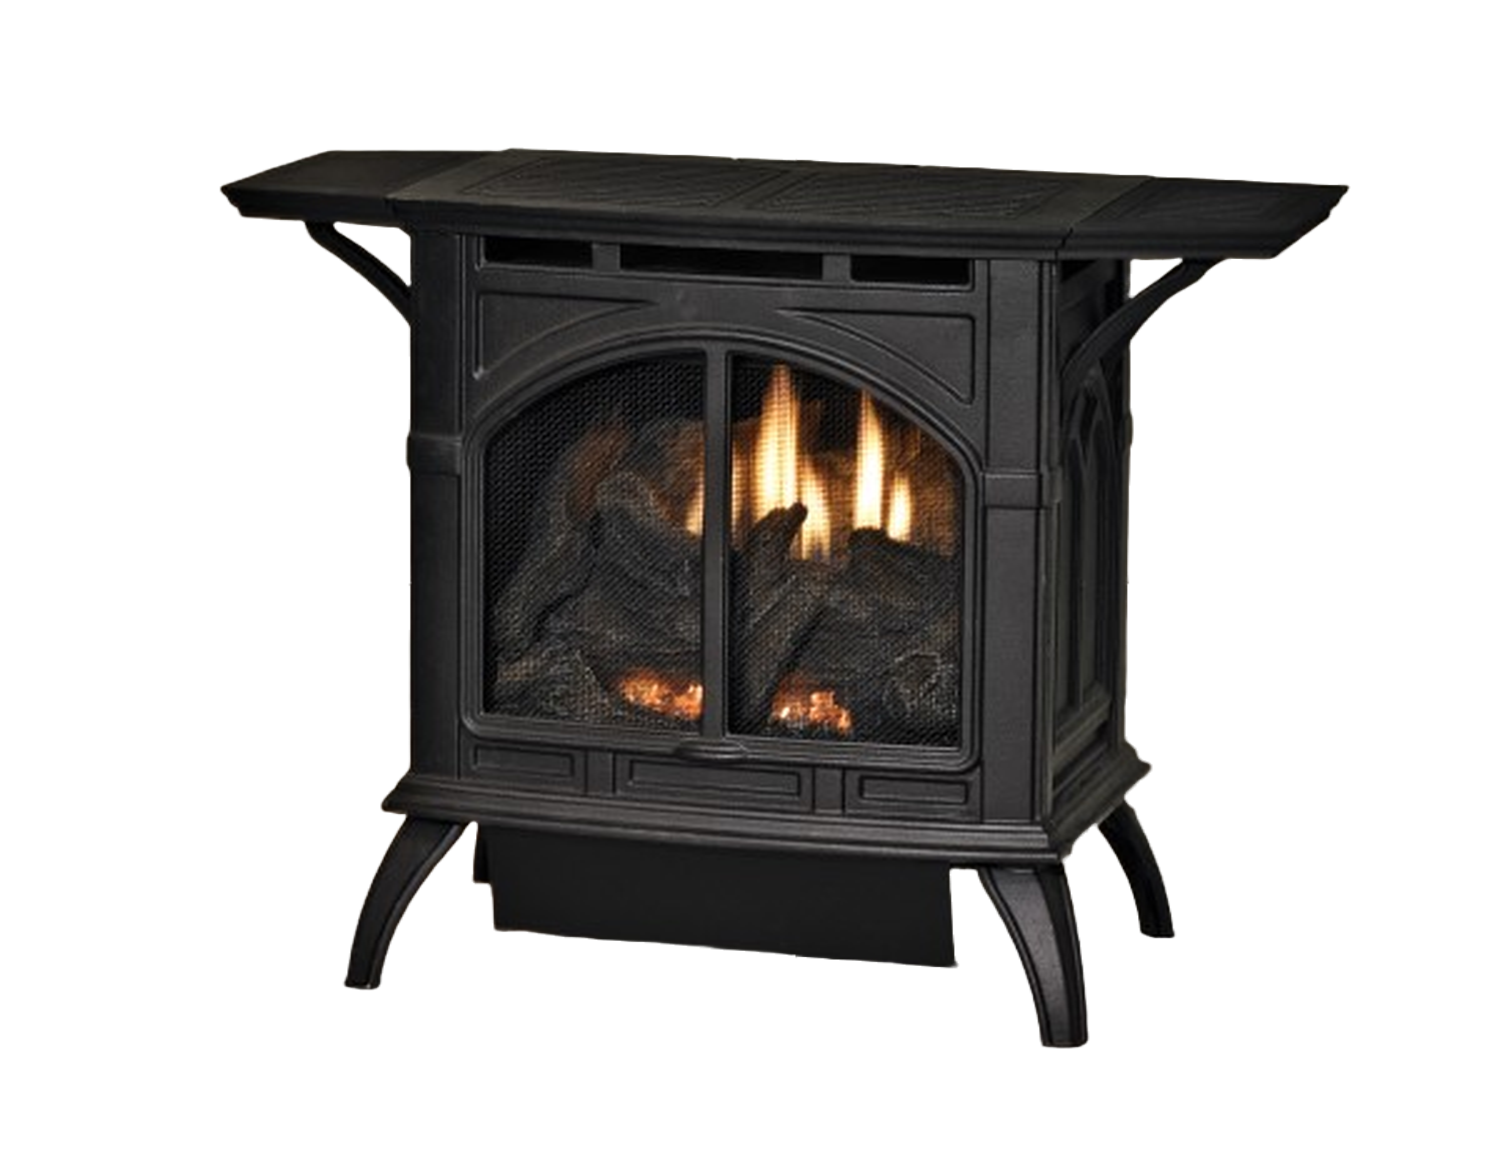 White Mountain Heart Cast Iron Stove slose-up fire lit